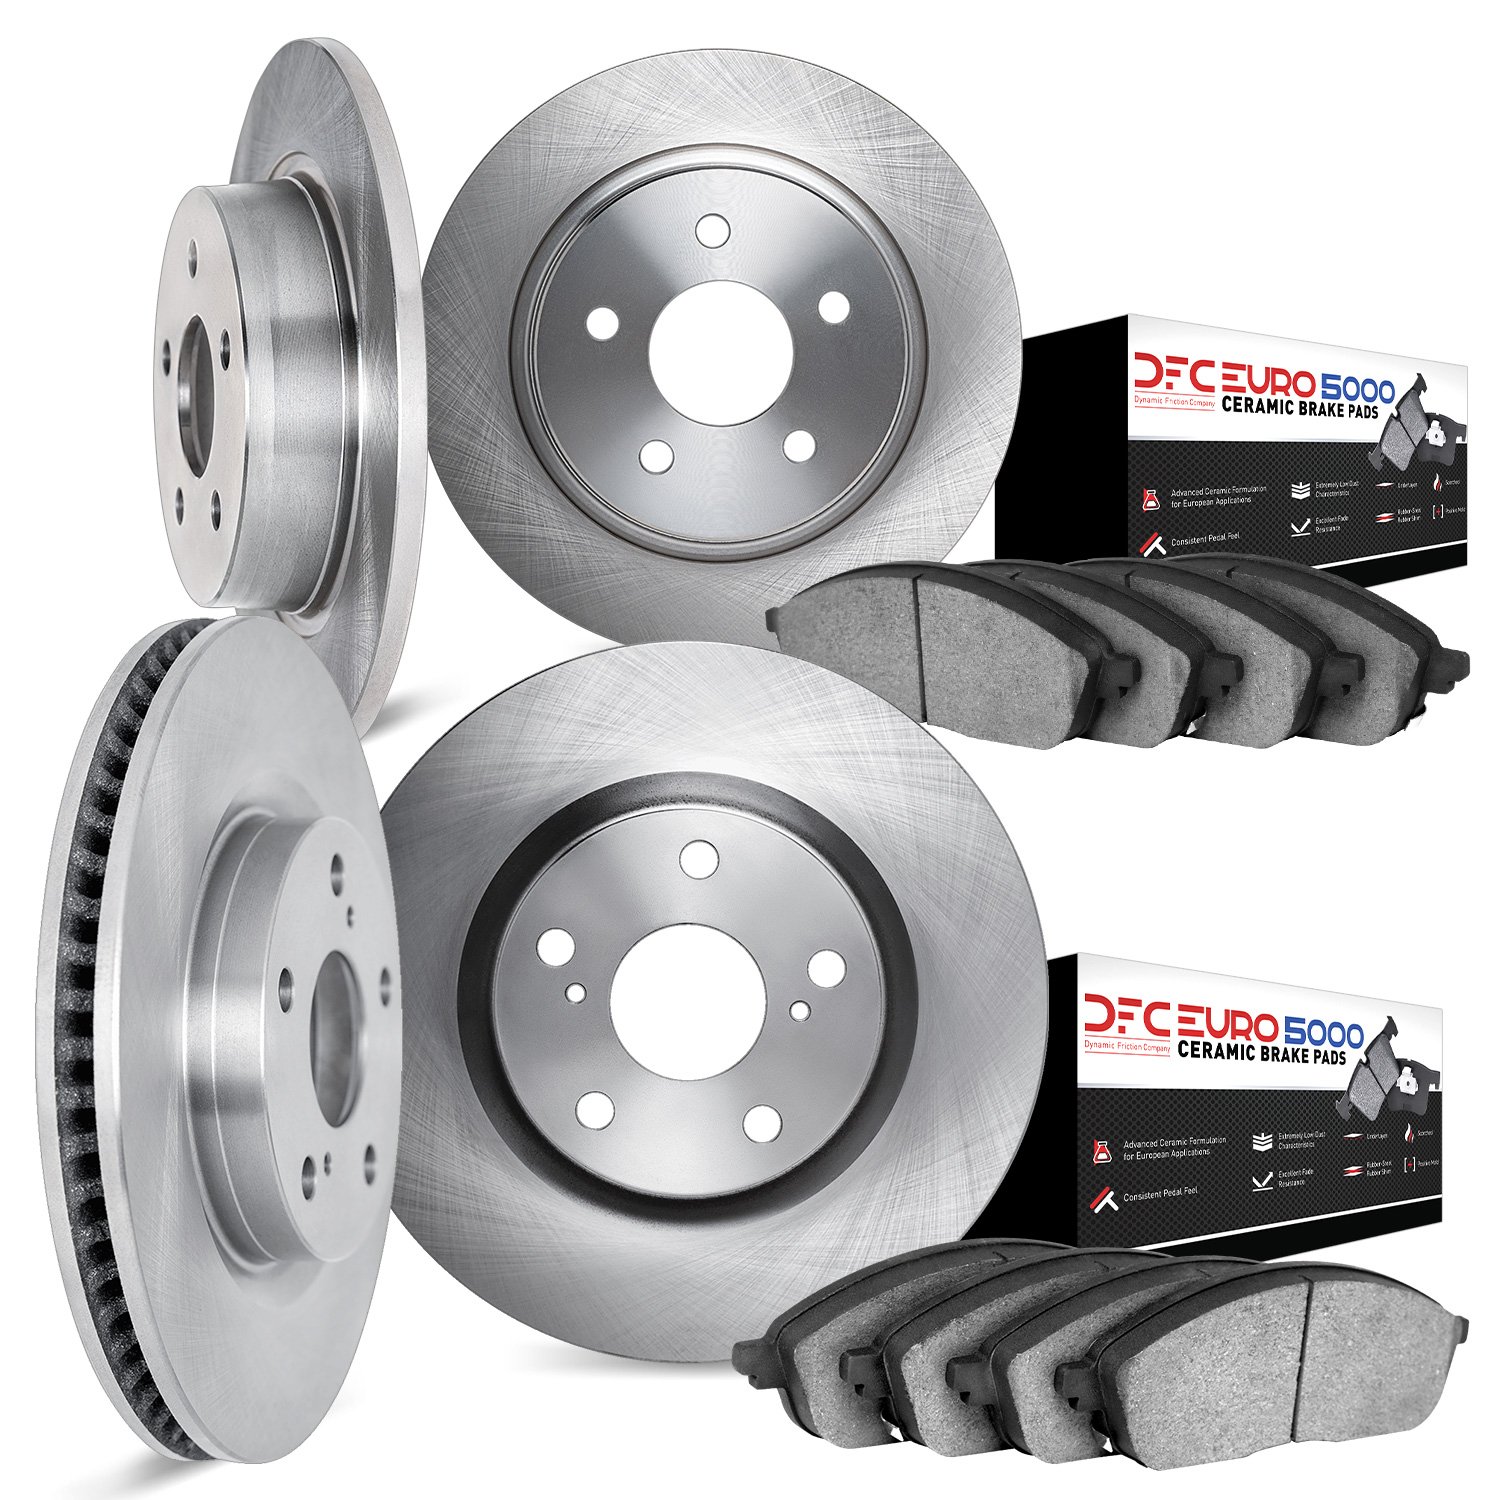 6604-10235 Brake Rotors w/5000 Euro Ceramic Brake Pads, 1999-2004 Land Rover, Position: Front and Rear